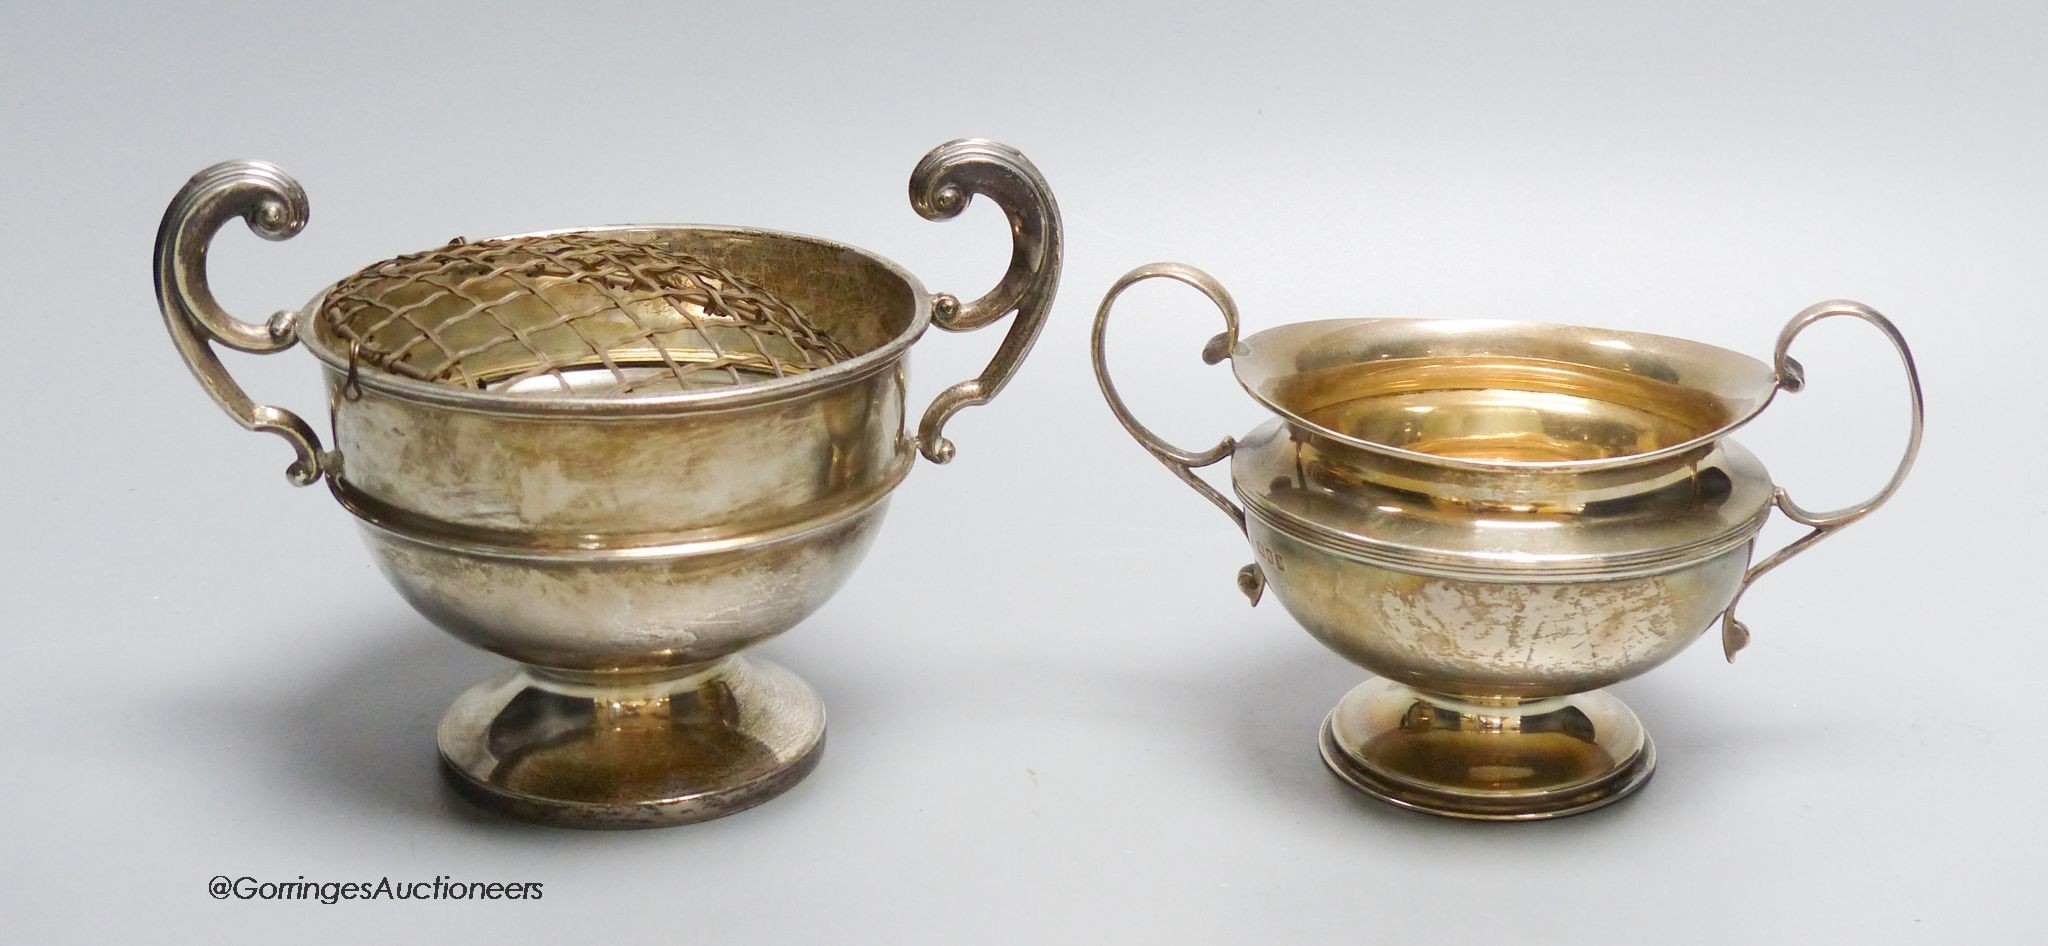 A two handled silver small rose bowl, Birmingham 1929, 4.6oz., 17cm wide, and a two handled silver sugar bowl, London 1920, 6.3 oz.